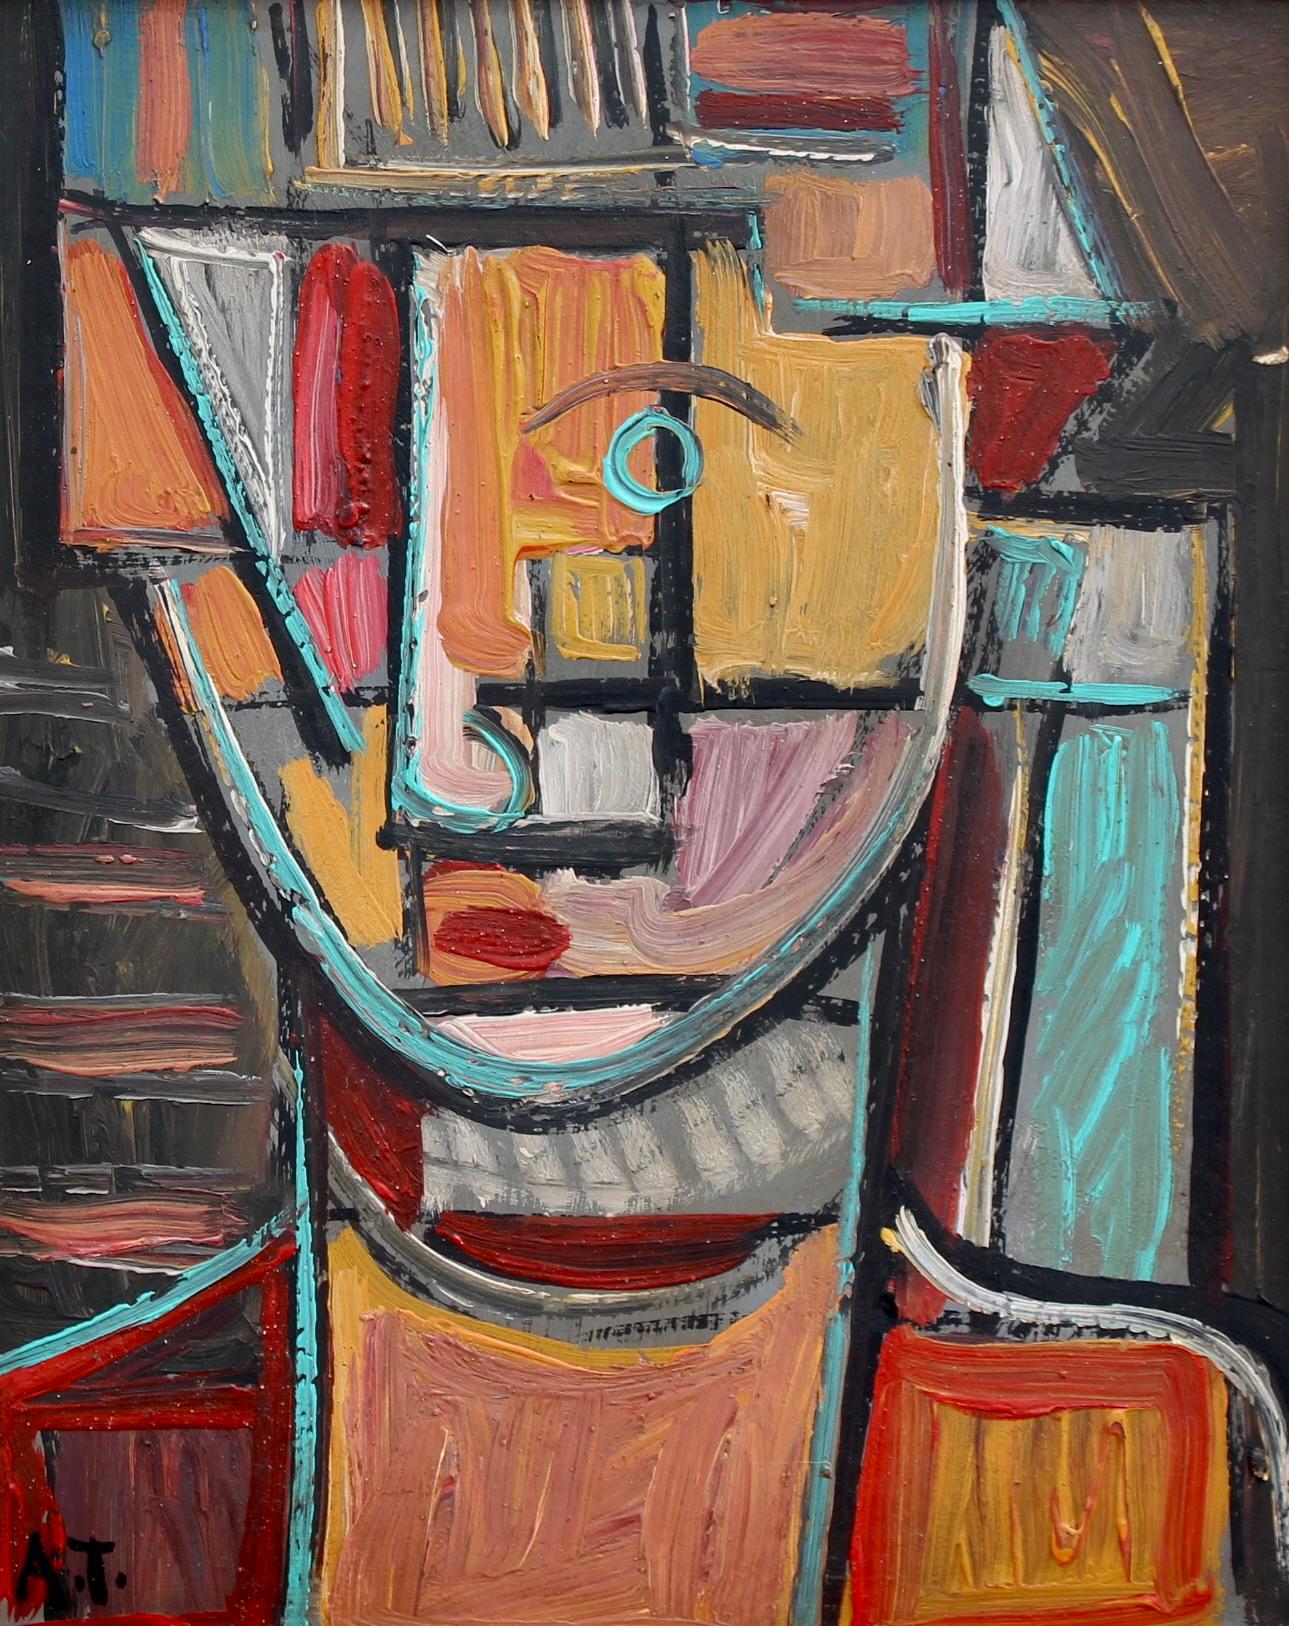 'Portrait of Cubist Man', Berlin School (circa 1960s) - Painting by Unknown